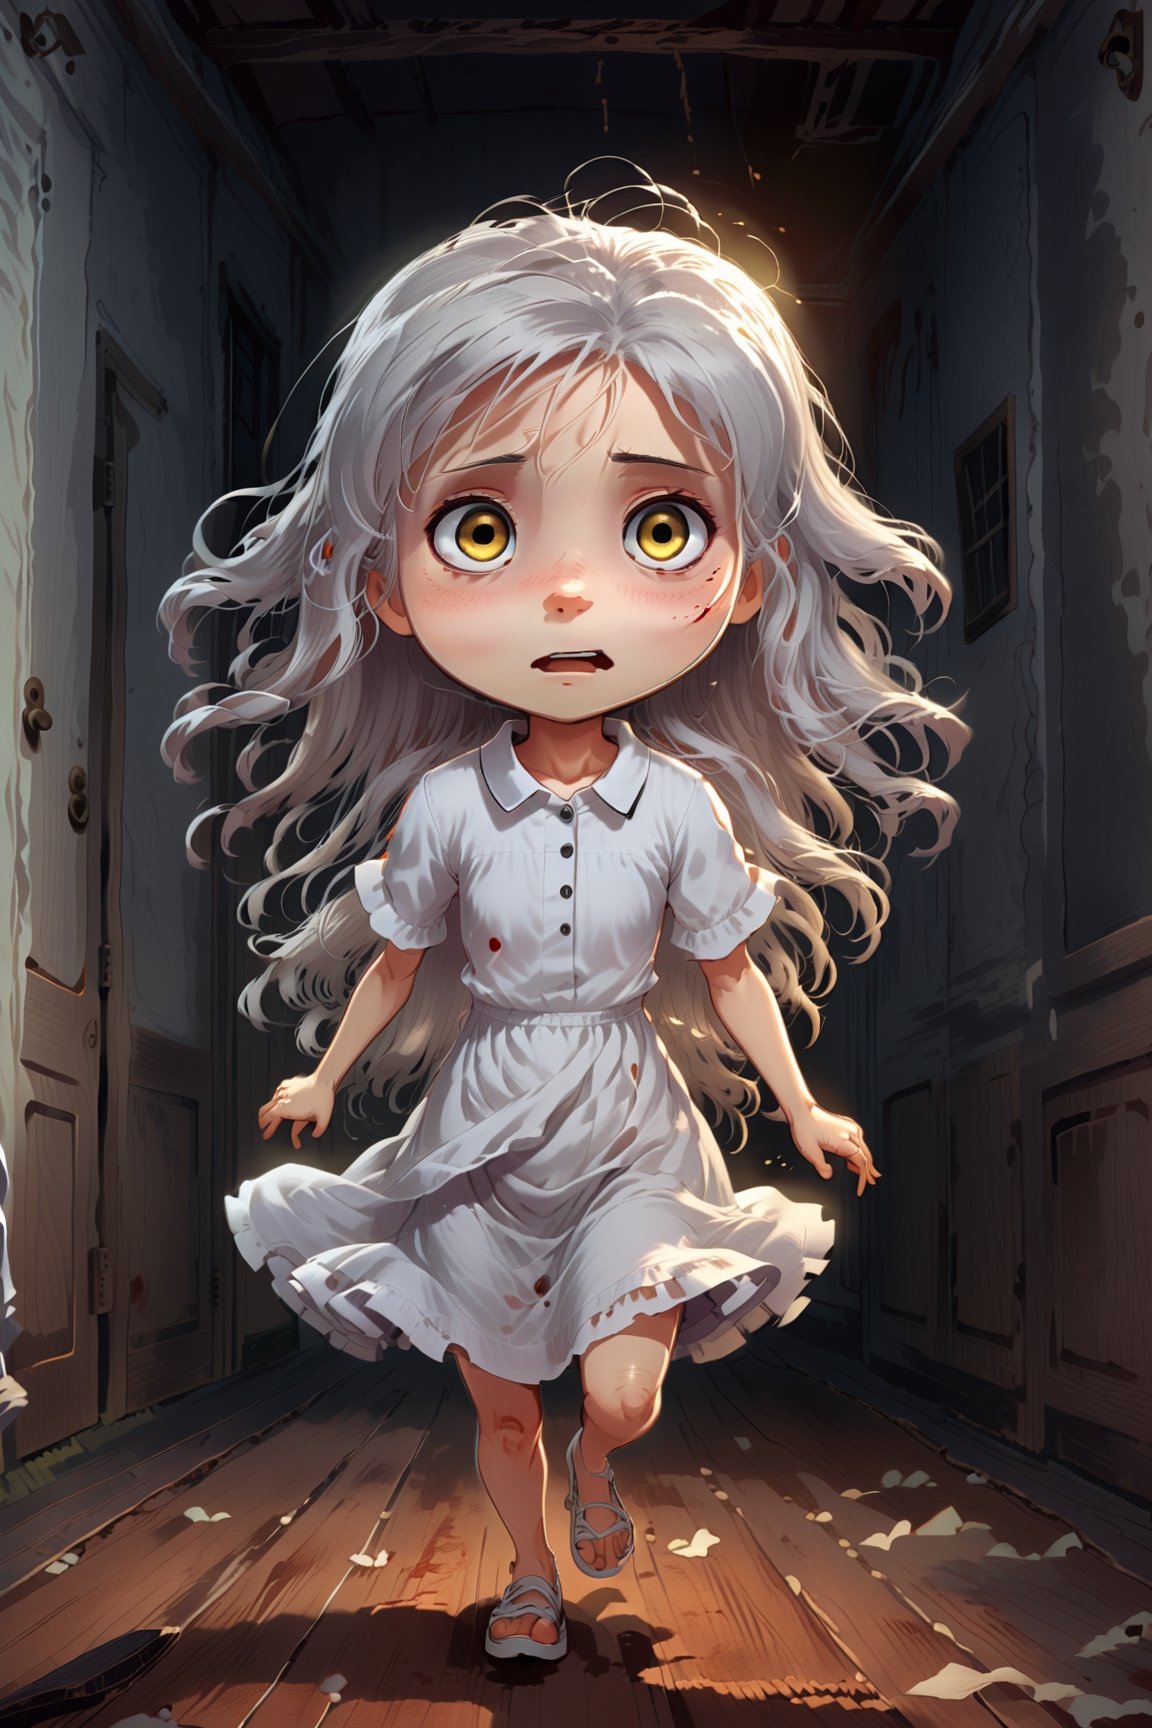 ((Best Quality, 8K, Masterpiece: 1.4)),Anime, white hair, long hair, gray silver white eyes, barefoot, white shirt, plain Gown, in a Haunted house horror, loli, kid, child, petite body, horror cinematic, scared, running away from the creepy monster behind her, 2D Animated CG Horror Movie style,chibi emote style